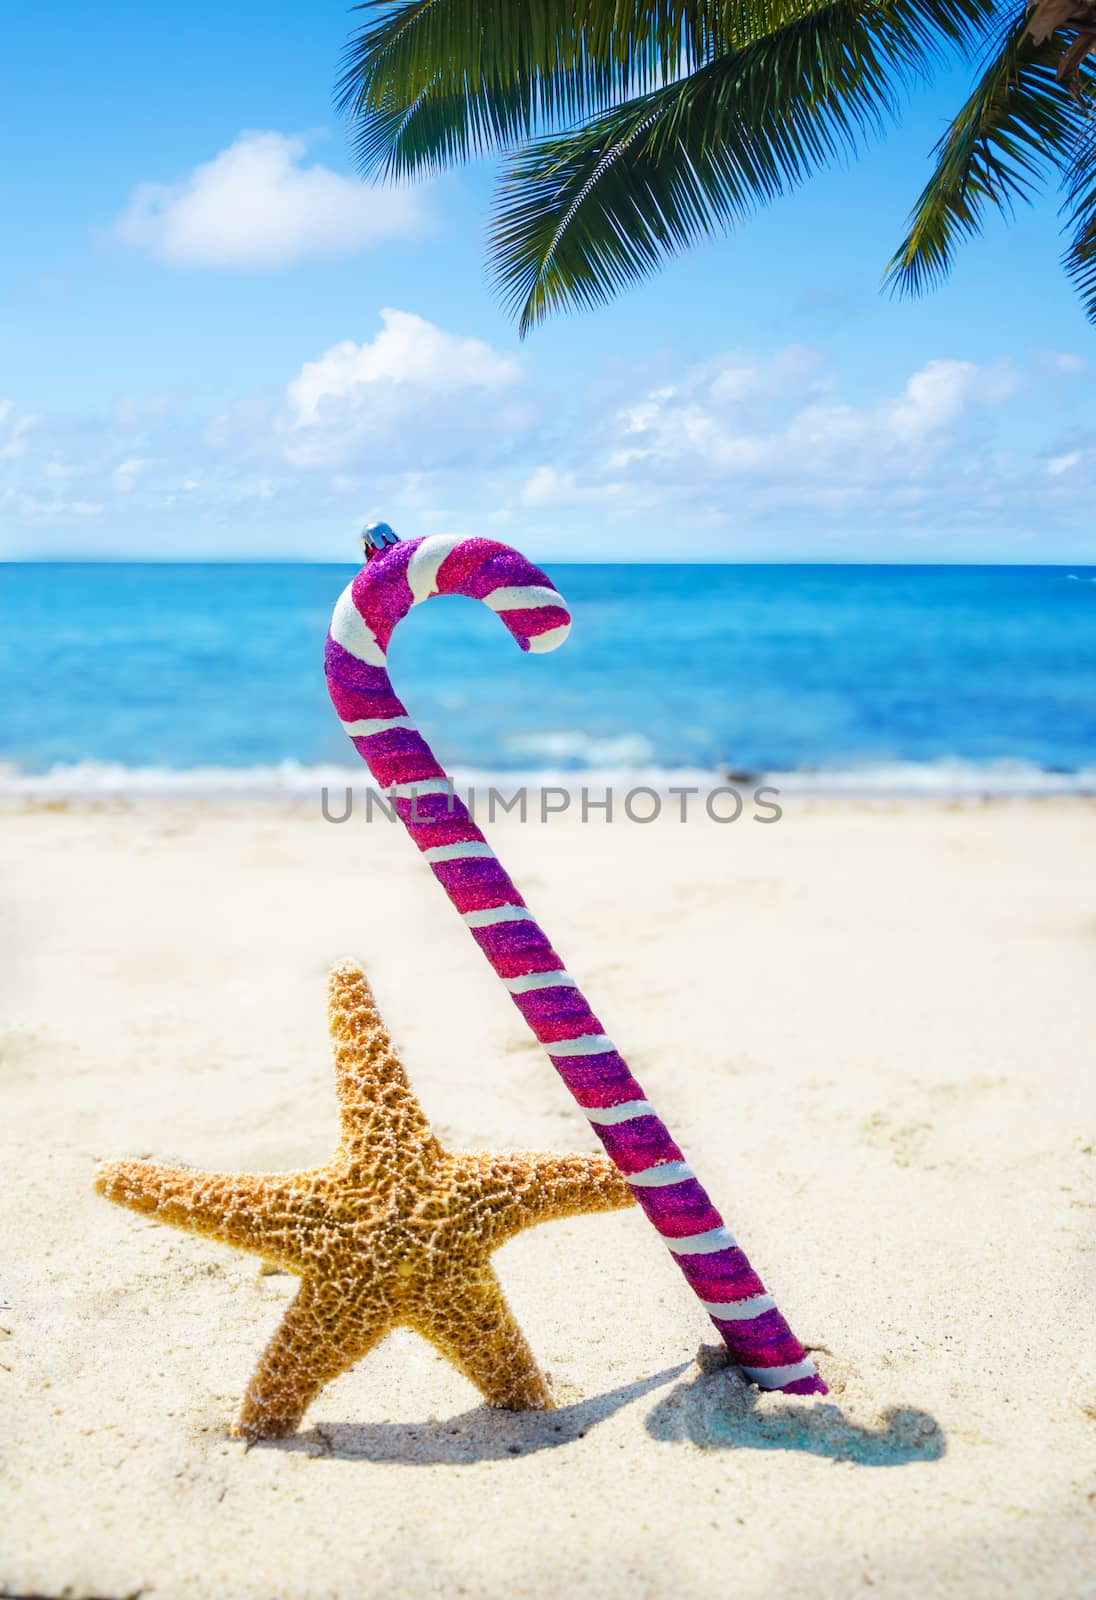 Starfish with Christmas decoration - holiday concept by EllenSmile